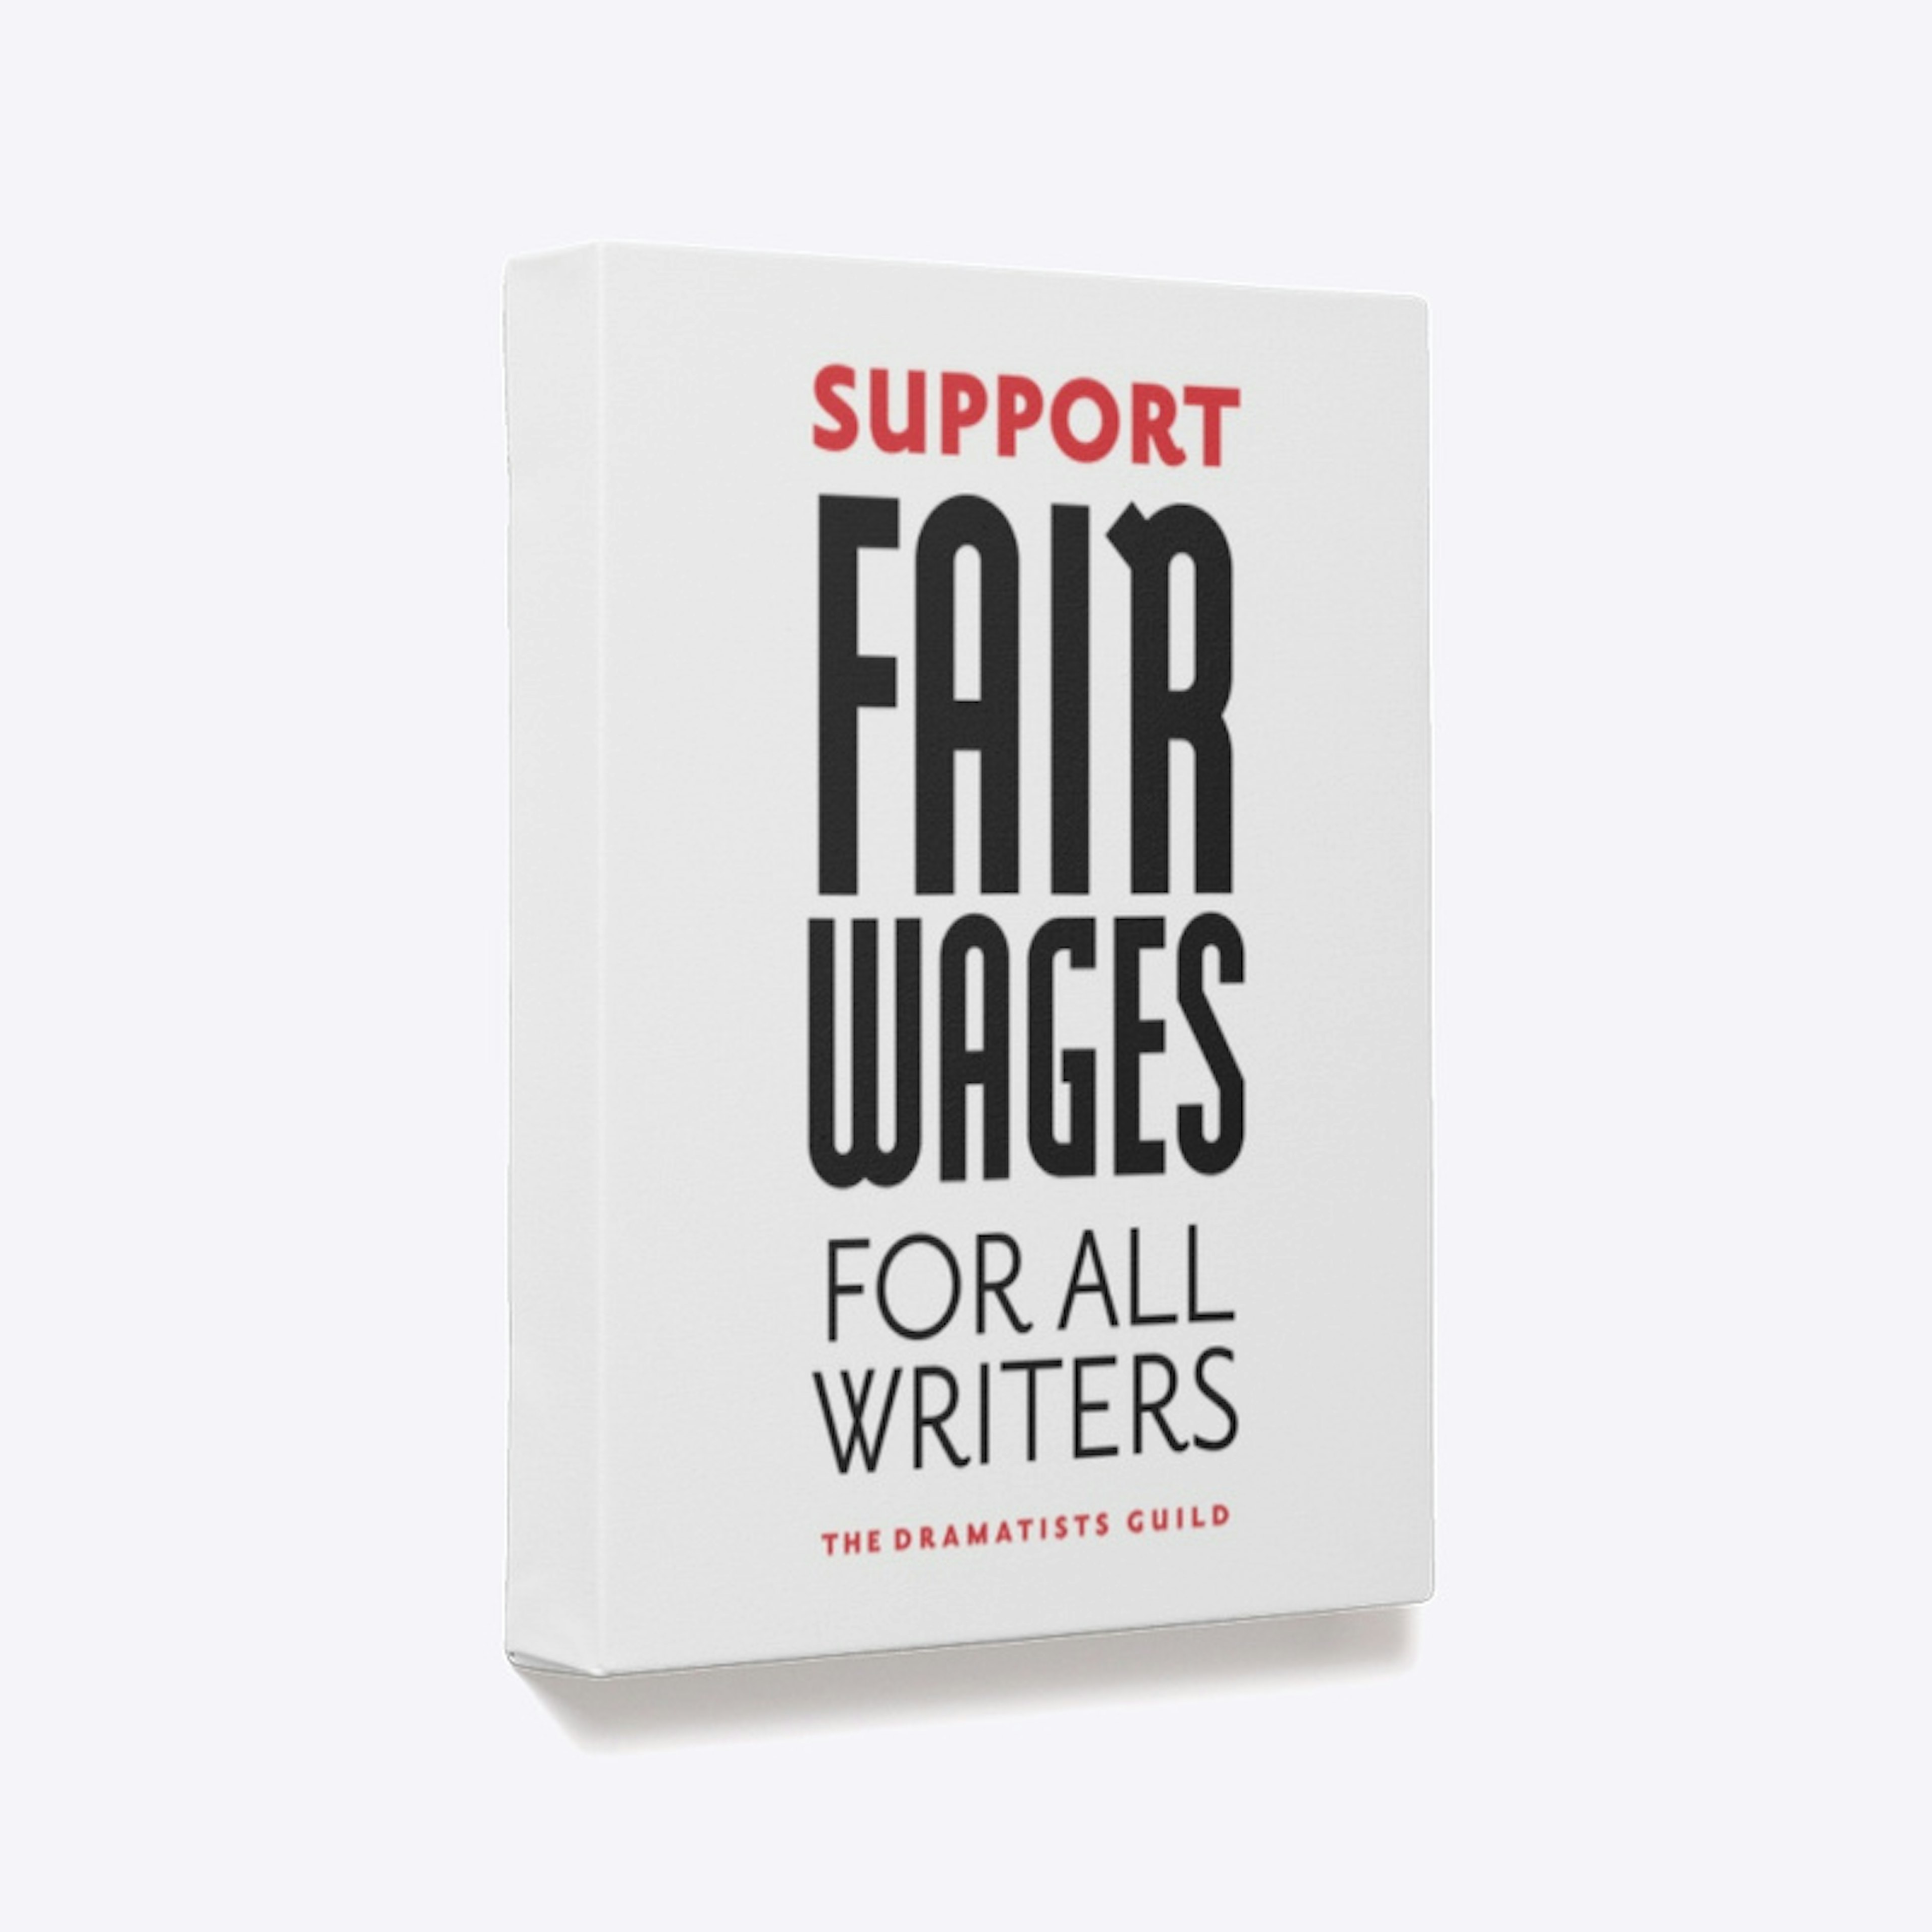 Fair Wages for Writers